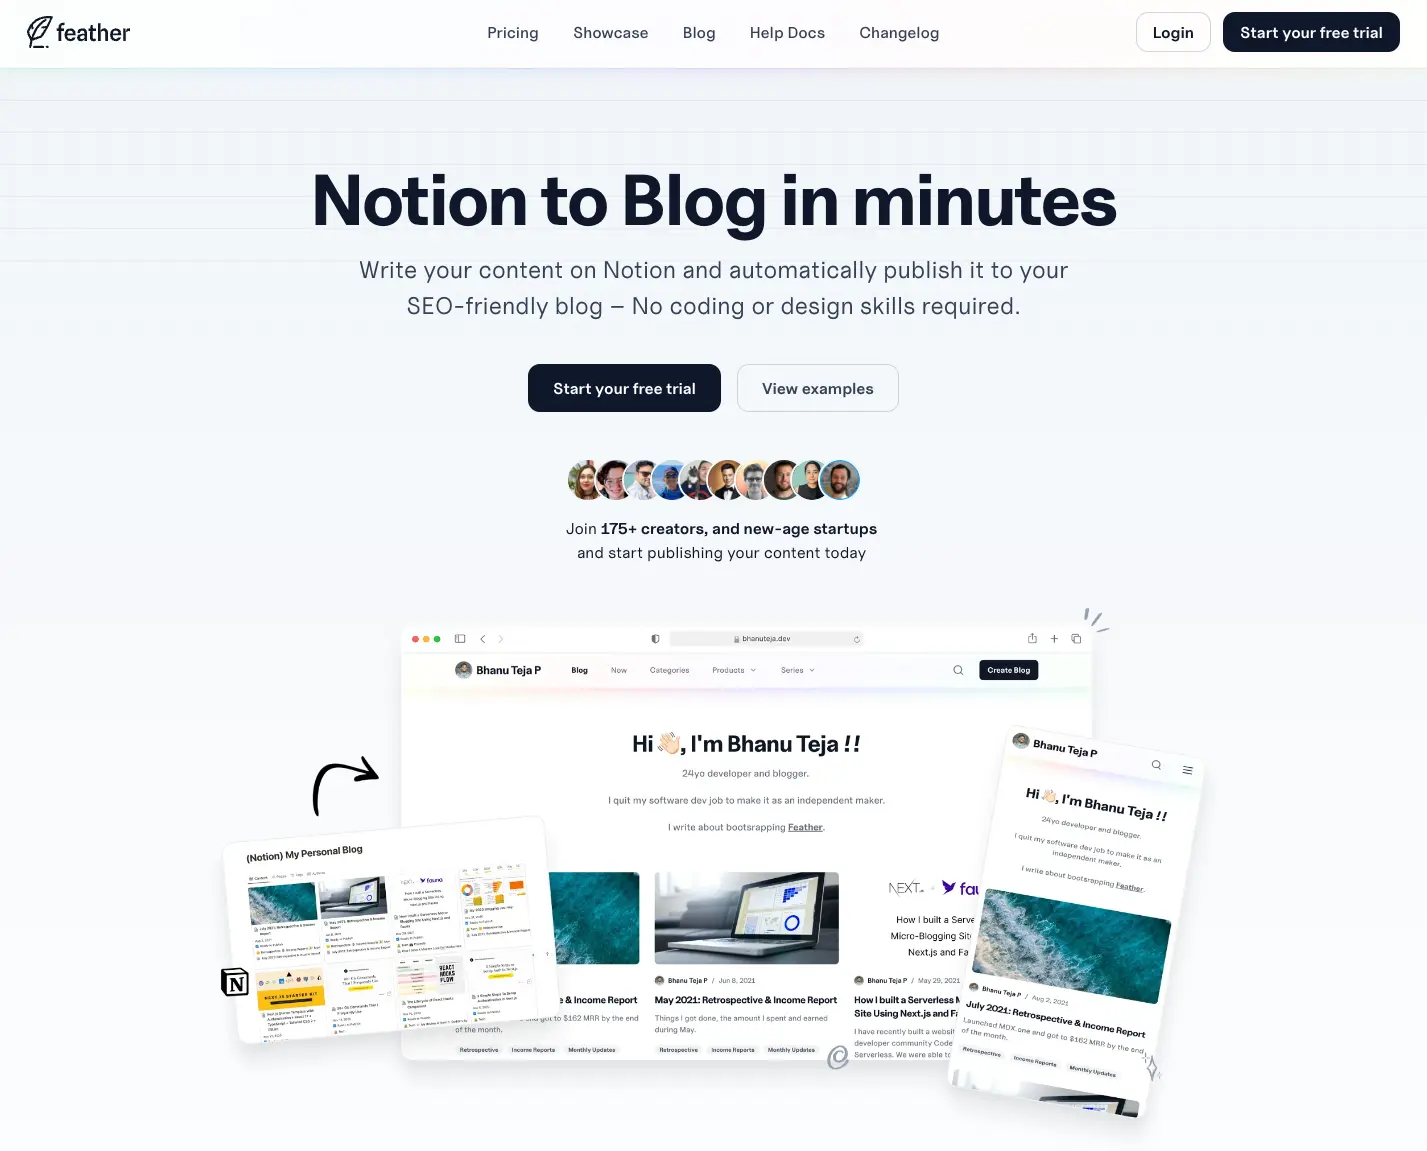 Feather landing page